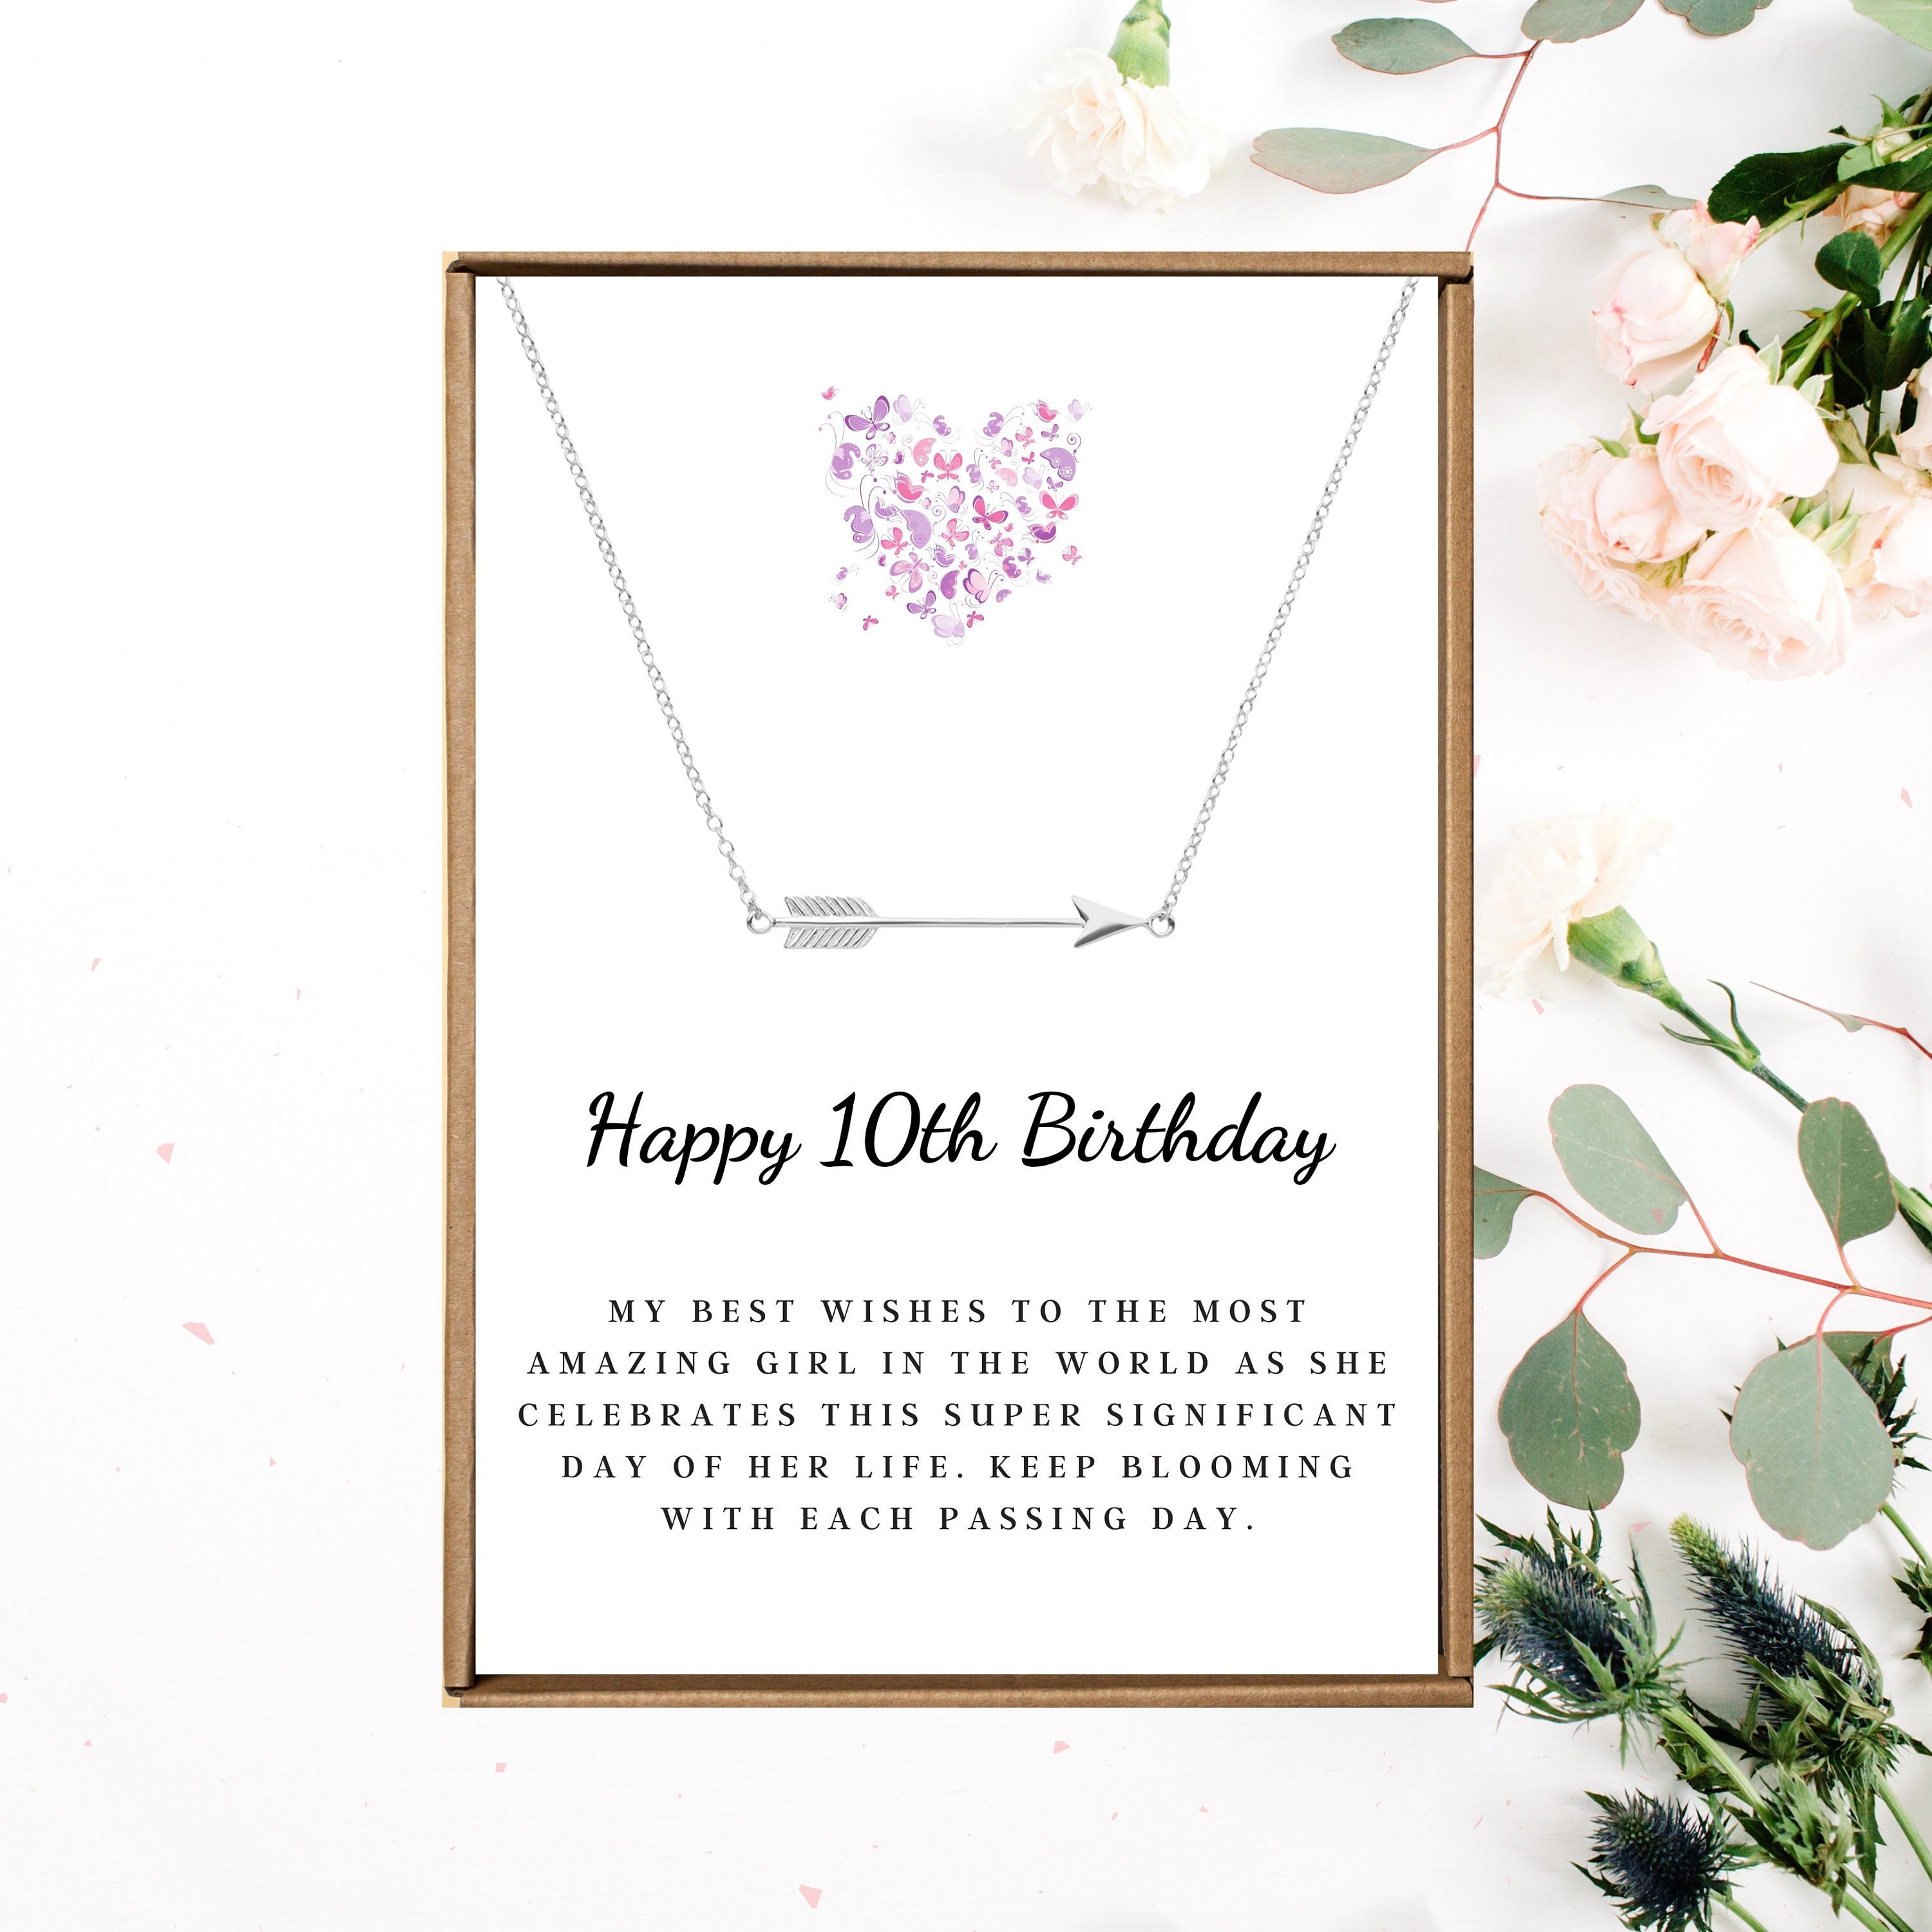 puekrtoa Birthday Gifts for 10 Year Old Girl, 10 Year Old Girl Gift Ideas, 10th Birthday Decorations for Girls, 10th Birthday Gifts for Girls, Present